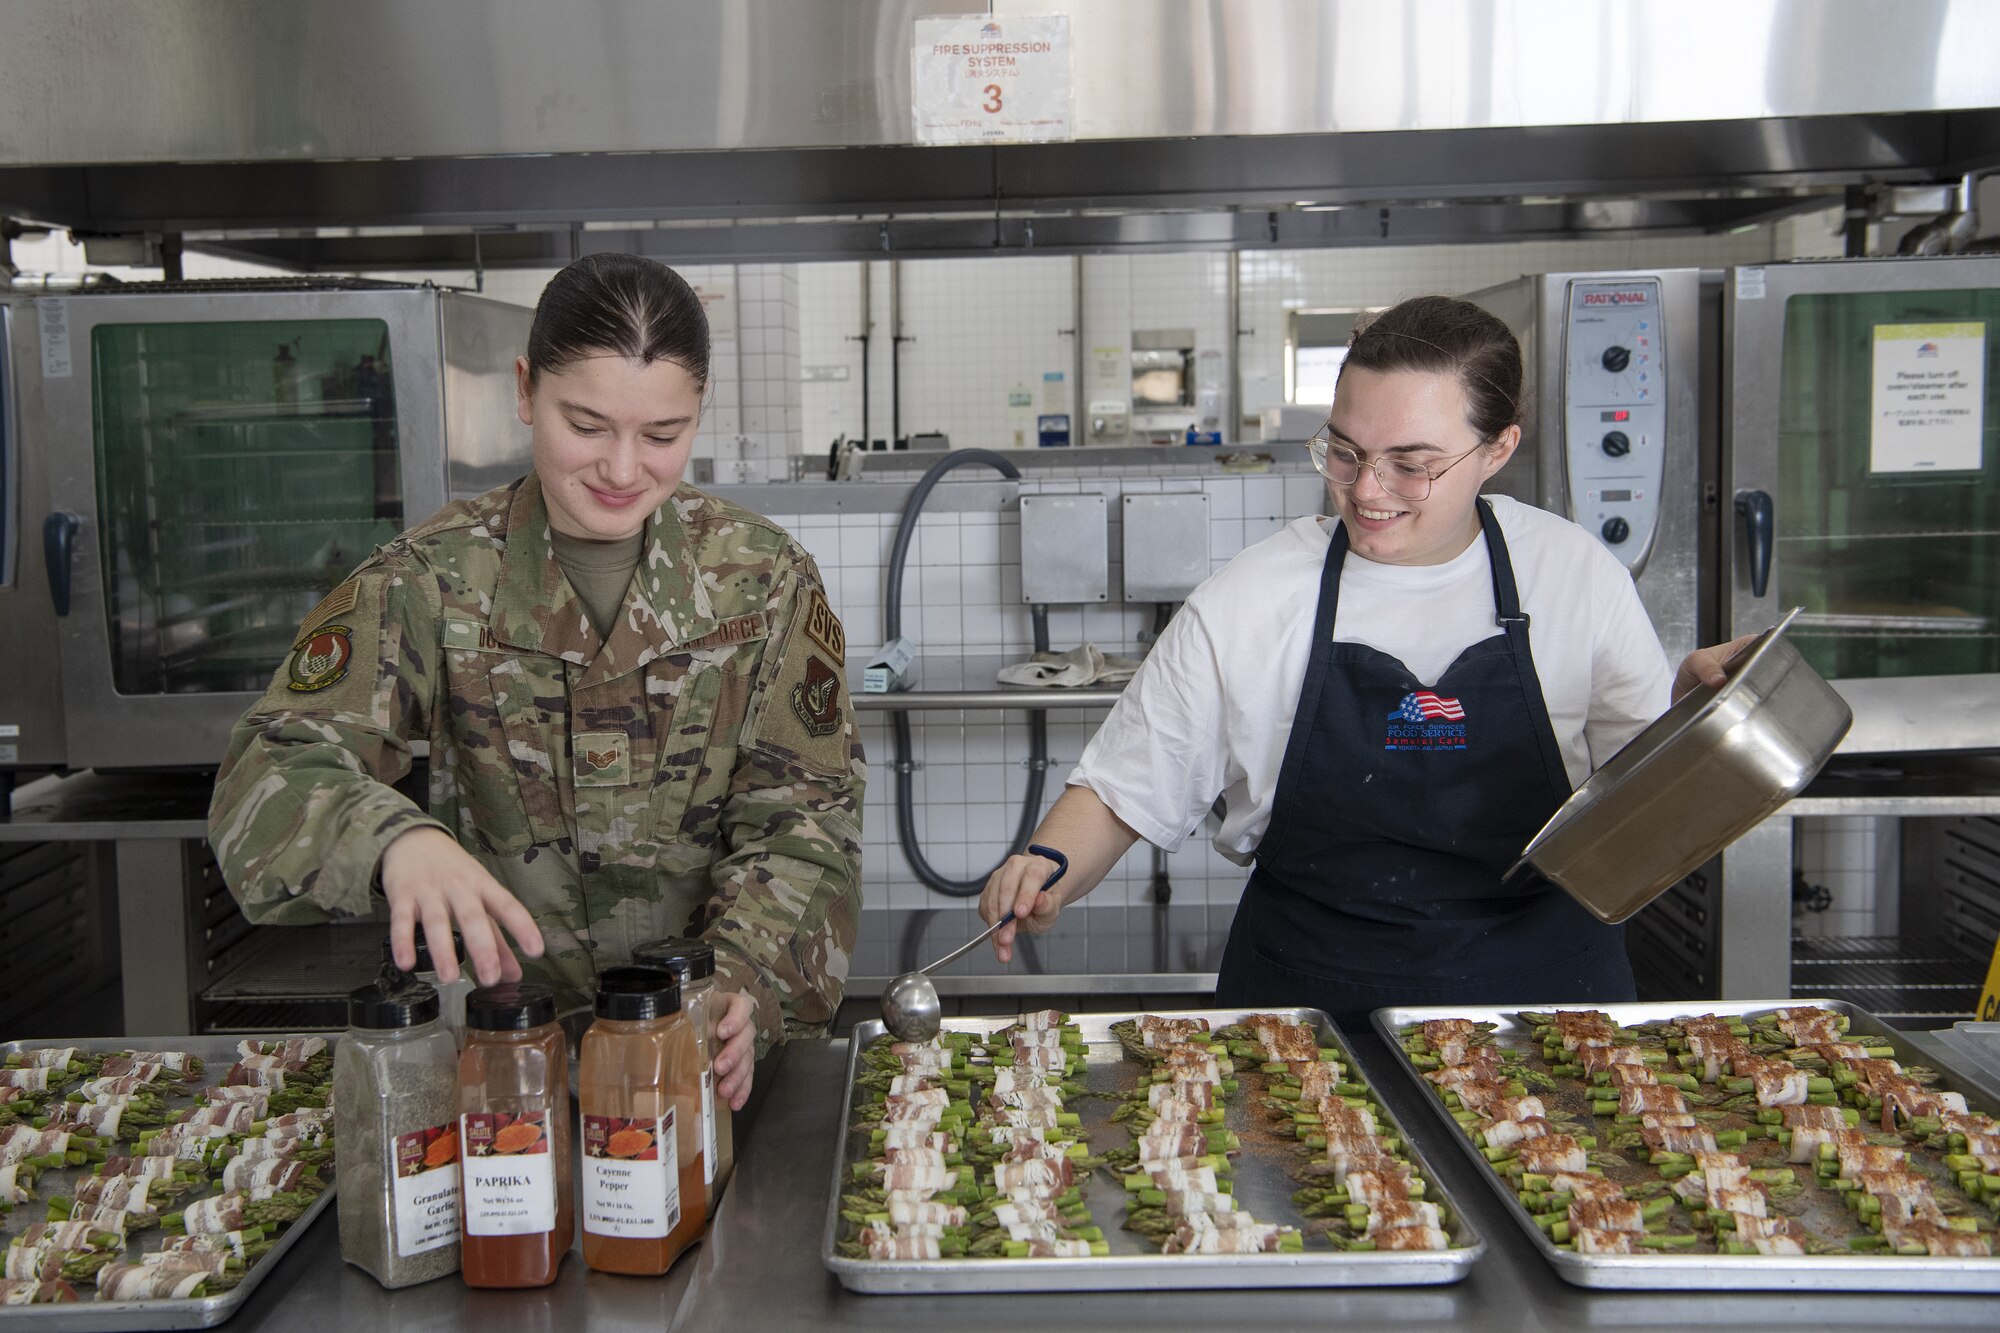 Staff Sgt. Allyson Douty and Staff Sgt. Kylee Masters Thomas, 374th Force Support Squadron food service shift leaders, prepare asparagus wrapped in to serve as part of Thanksgiving meals at the Samurai Café Dining Facility at Yokota Air Base, Japan, Nov. 24, 2022. U.S. Ambassador to Japan Rahm Emanuel, U.S. Air Force Lt. Gen. Ricky Rupp, Commander of U.S. Forces Japan and Fifth Air Force, and 374th Airlift Wing leadership took time to serve and celebrate Thanksgiving Day alongside service members and families assigned to Yokota. (U.S. Air Force photo by Tech. Sgt. Christopher Hubenthal)